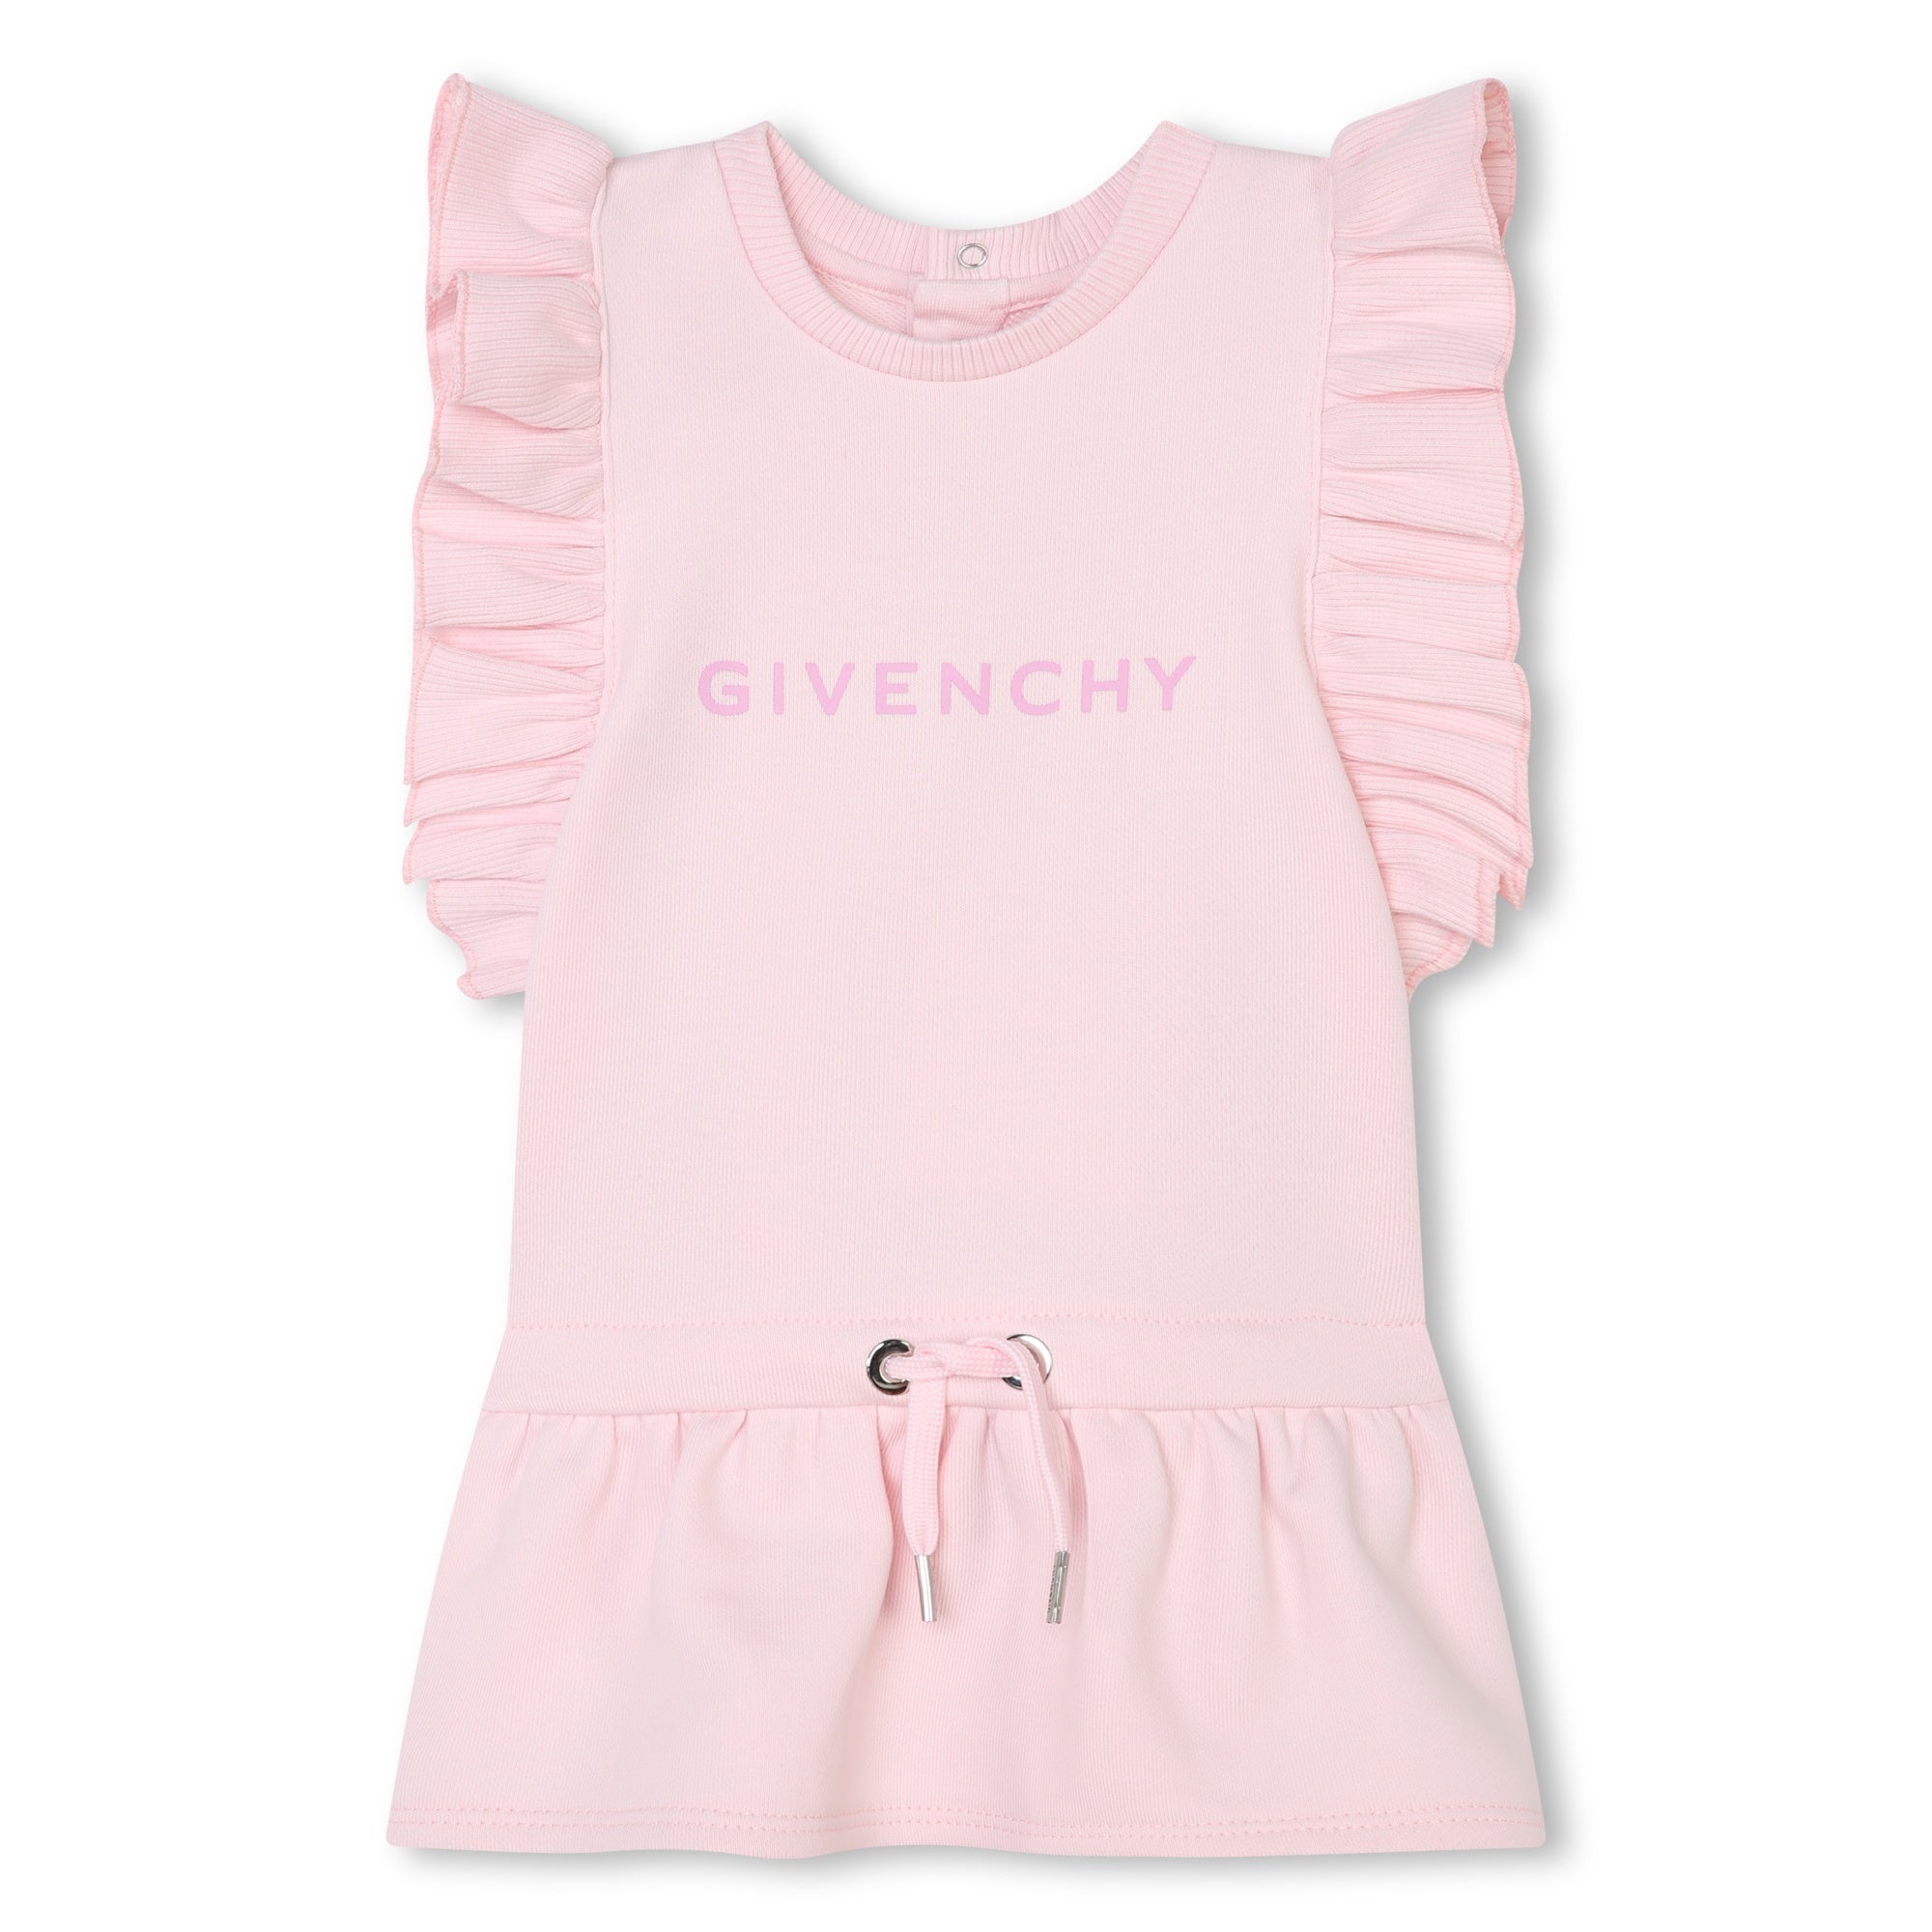 Givenchy Baby Girls Pink Dress